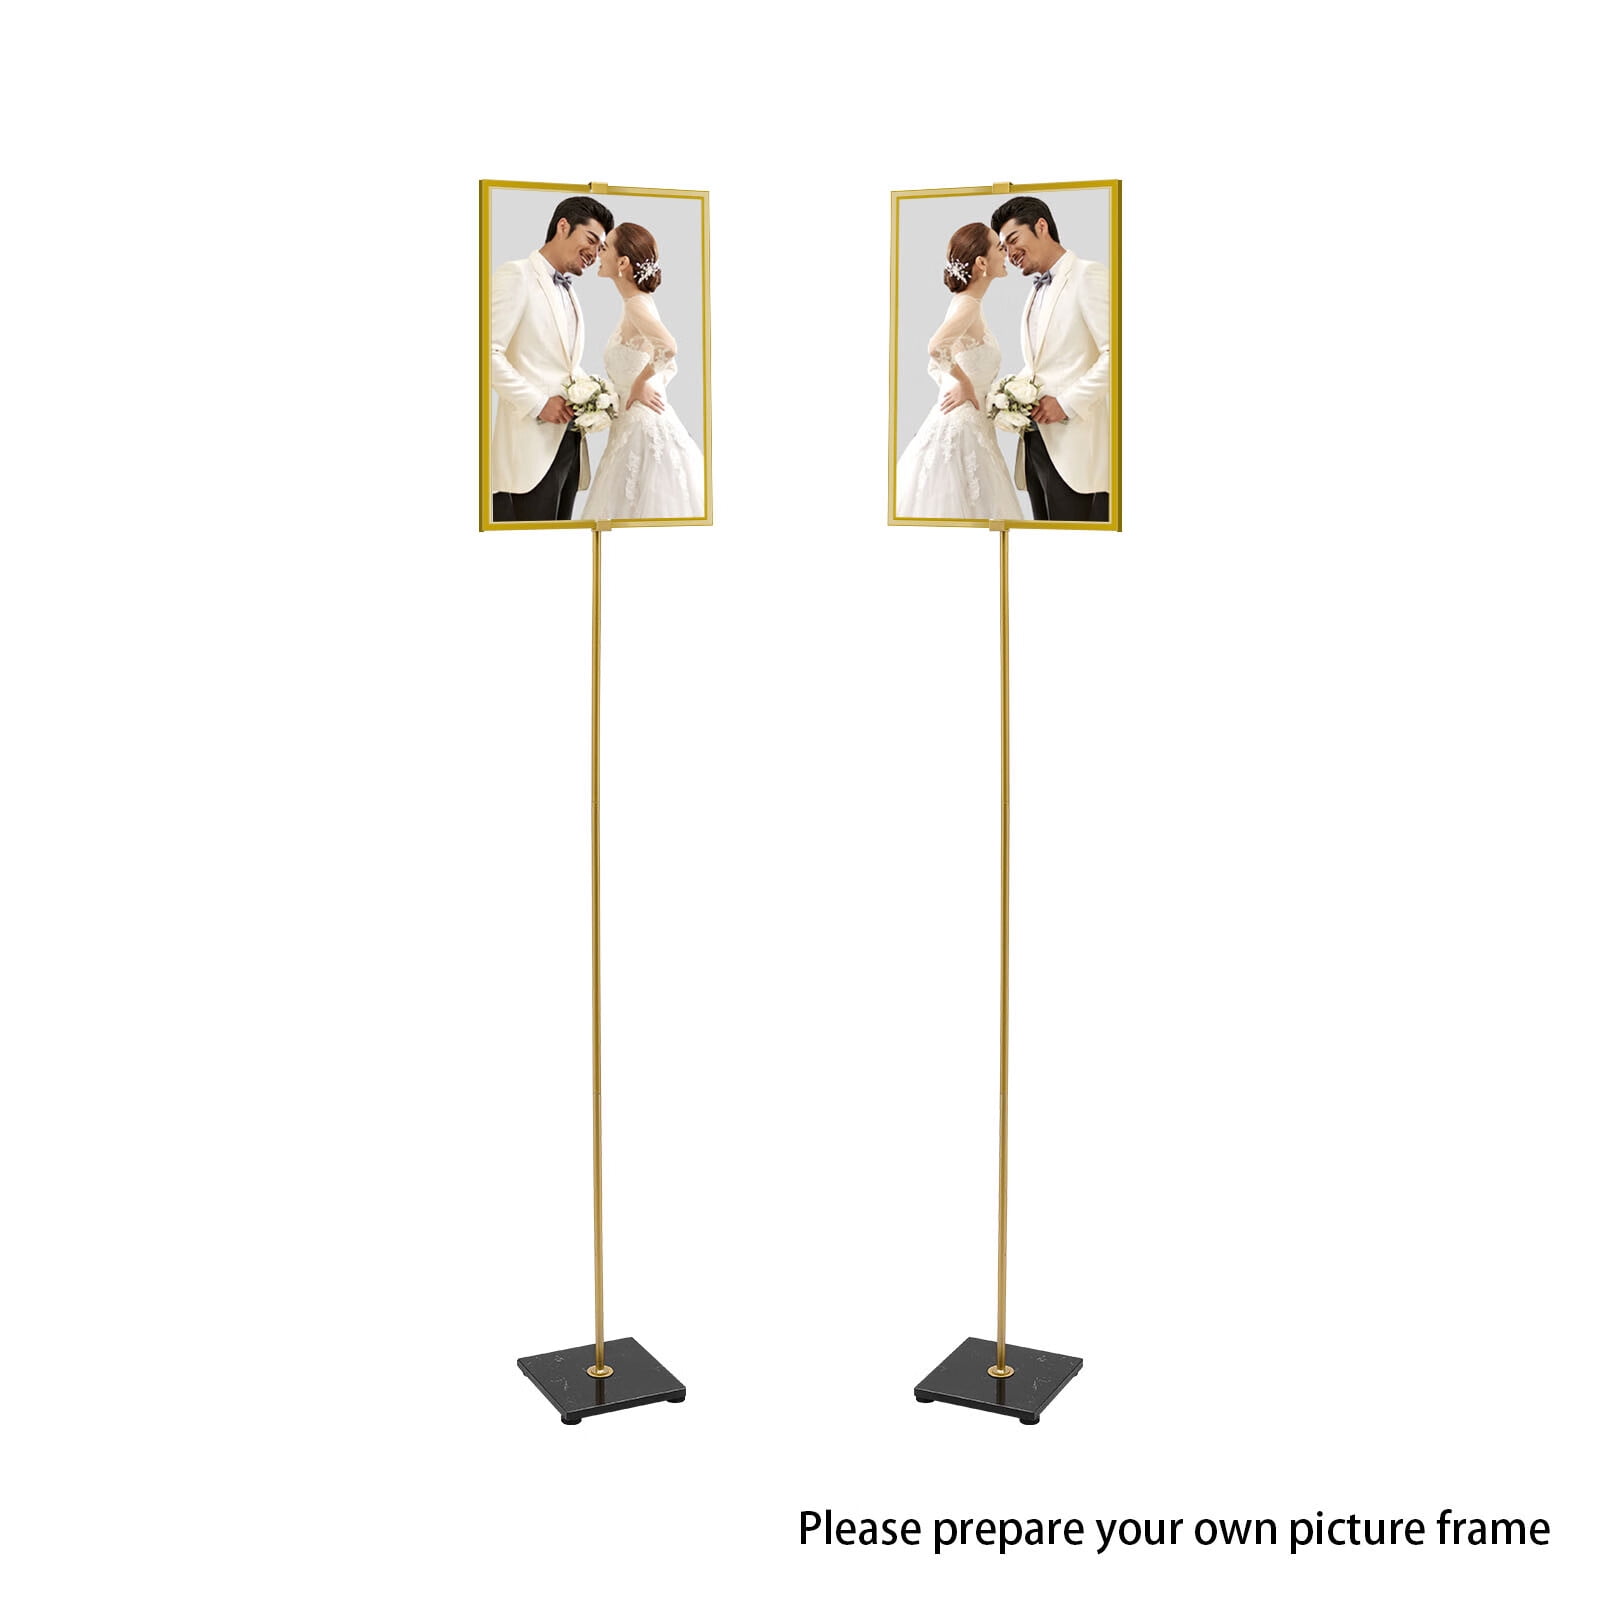 The Holiday Aisle® Light up Holiday Floor Sign with Easel Stand